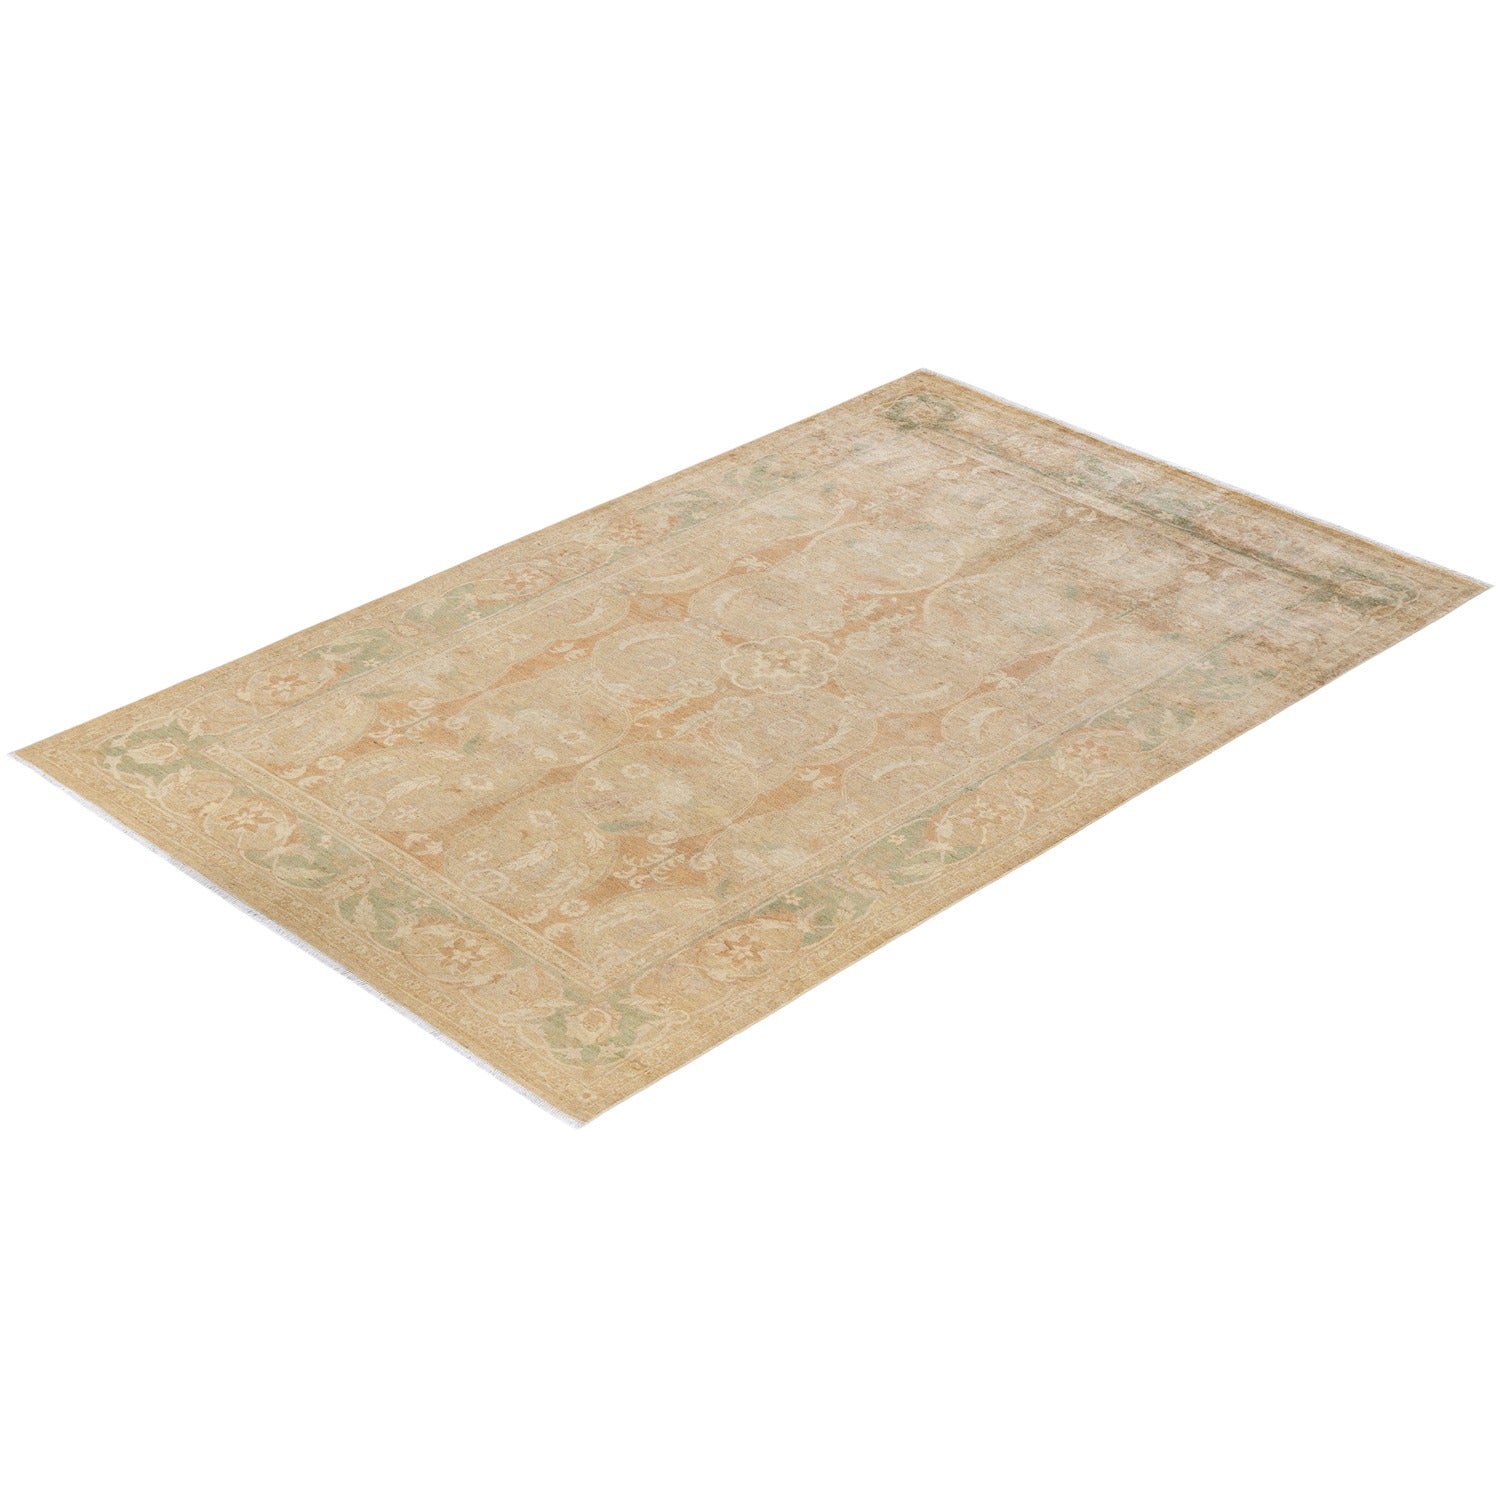 Vintage rectangular rug with delicate floral pattern in beige and brown.